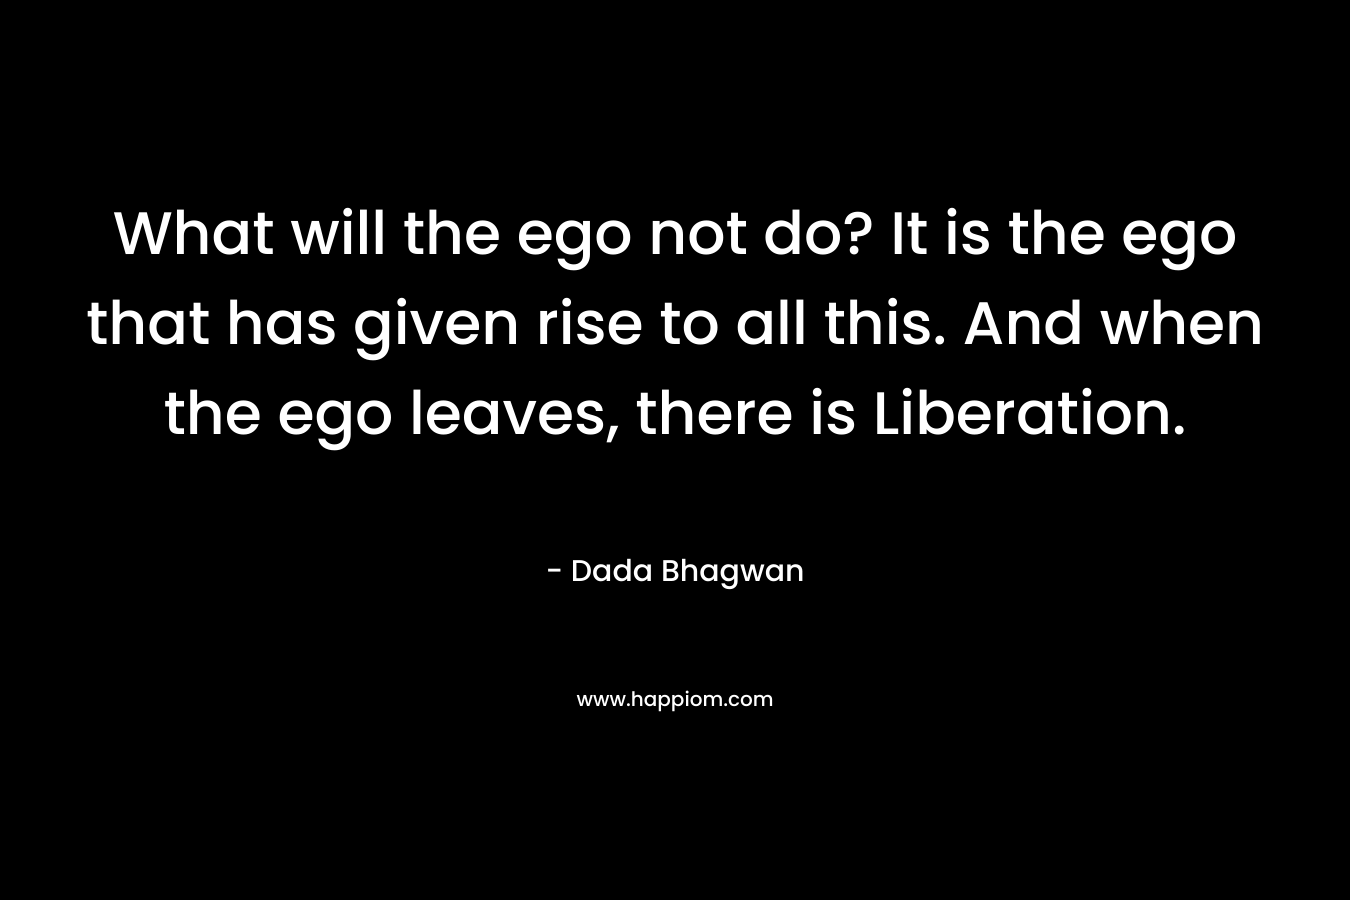 What will the ego not do? It is the ego that has given rise to all this. And when the ego leaves, there is Liberation.